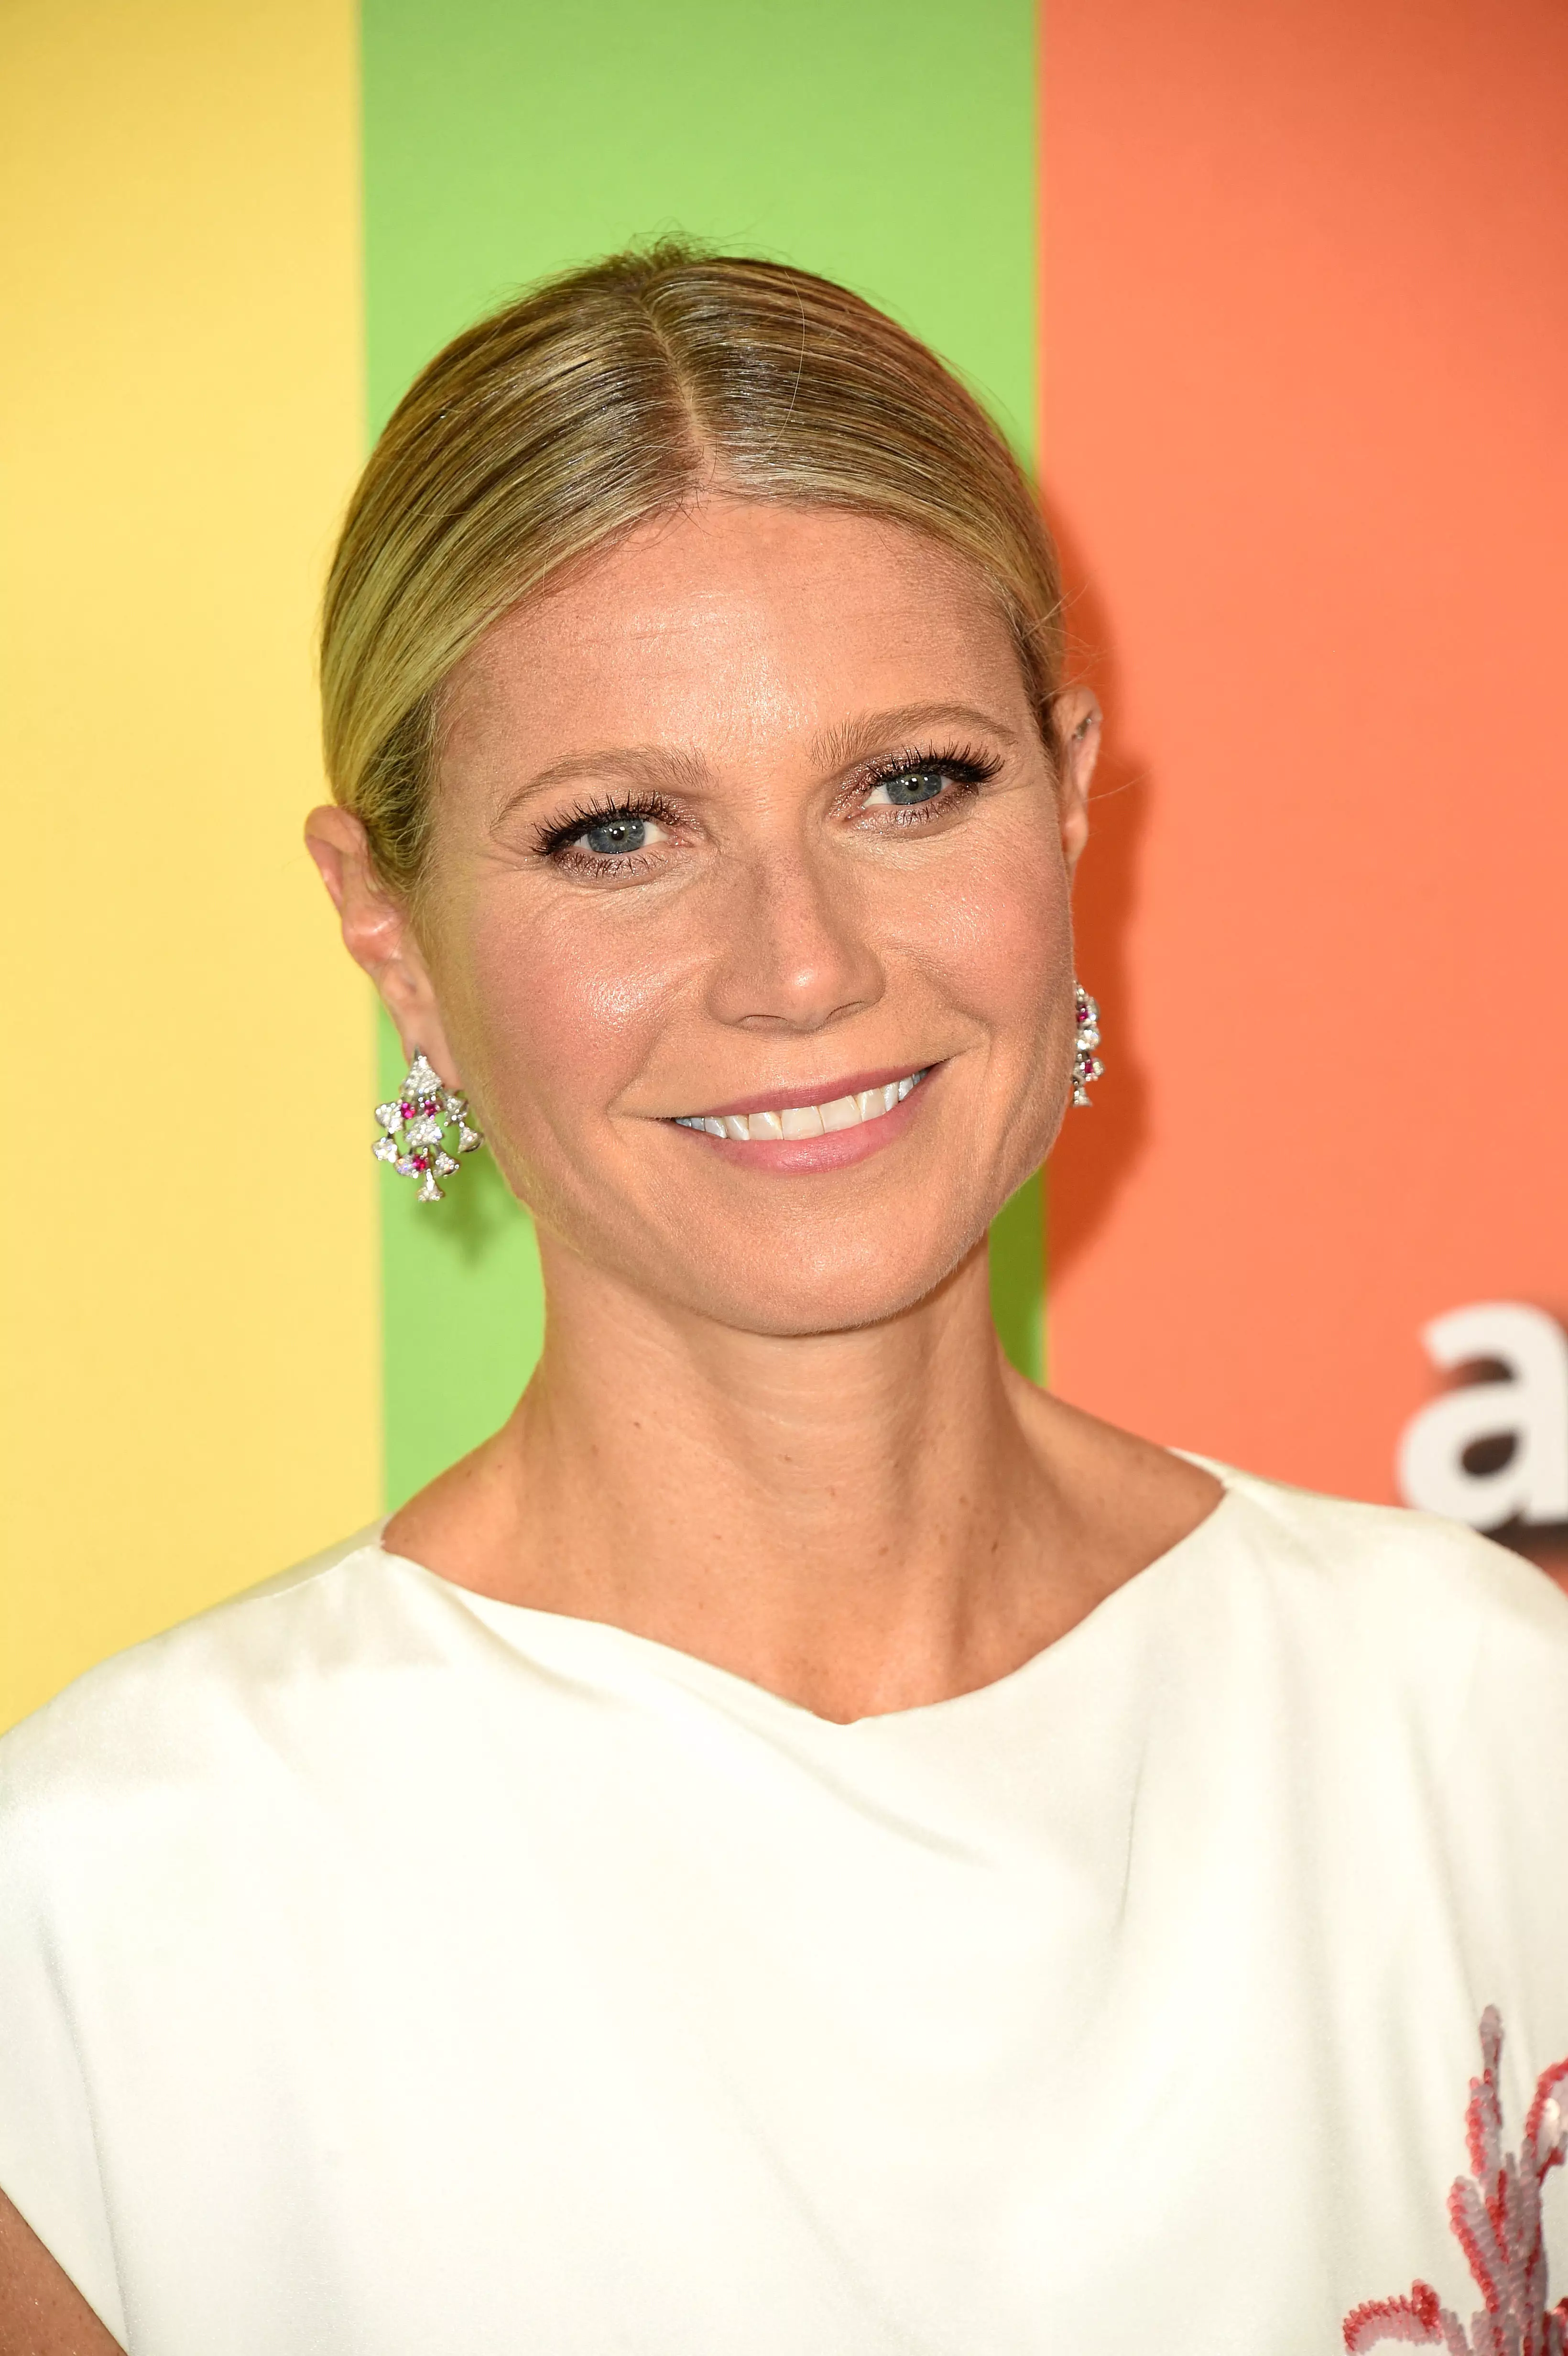 Gwyneth Paltrow has written about sex in the past.